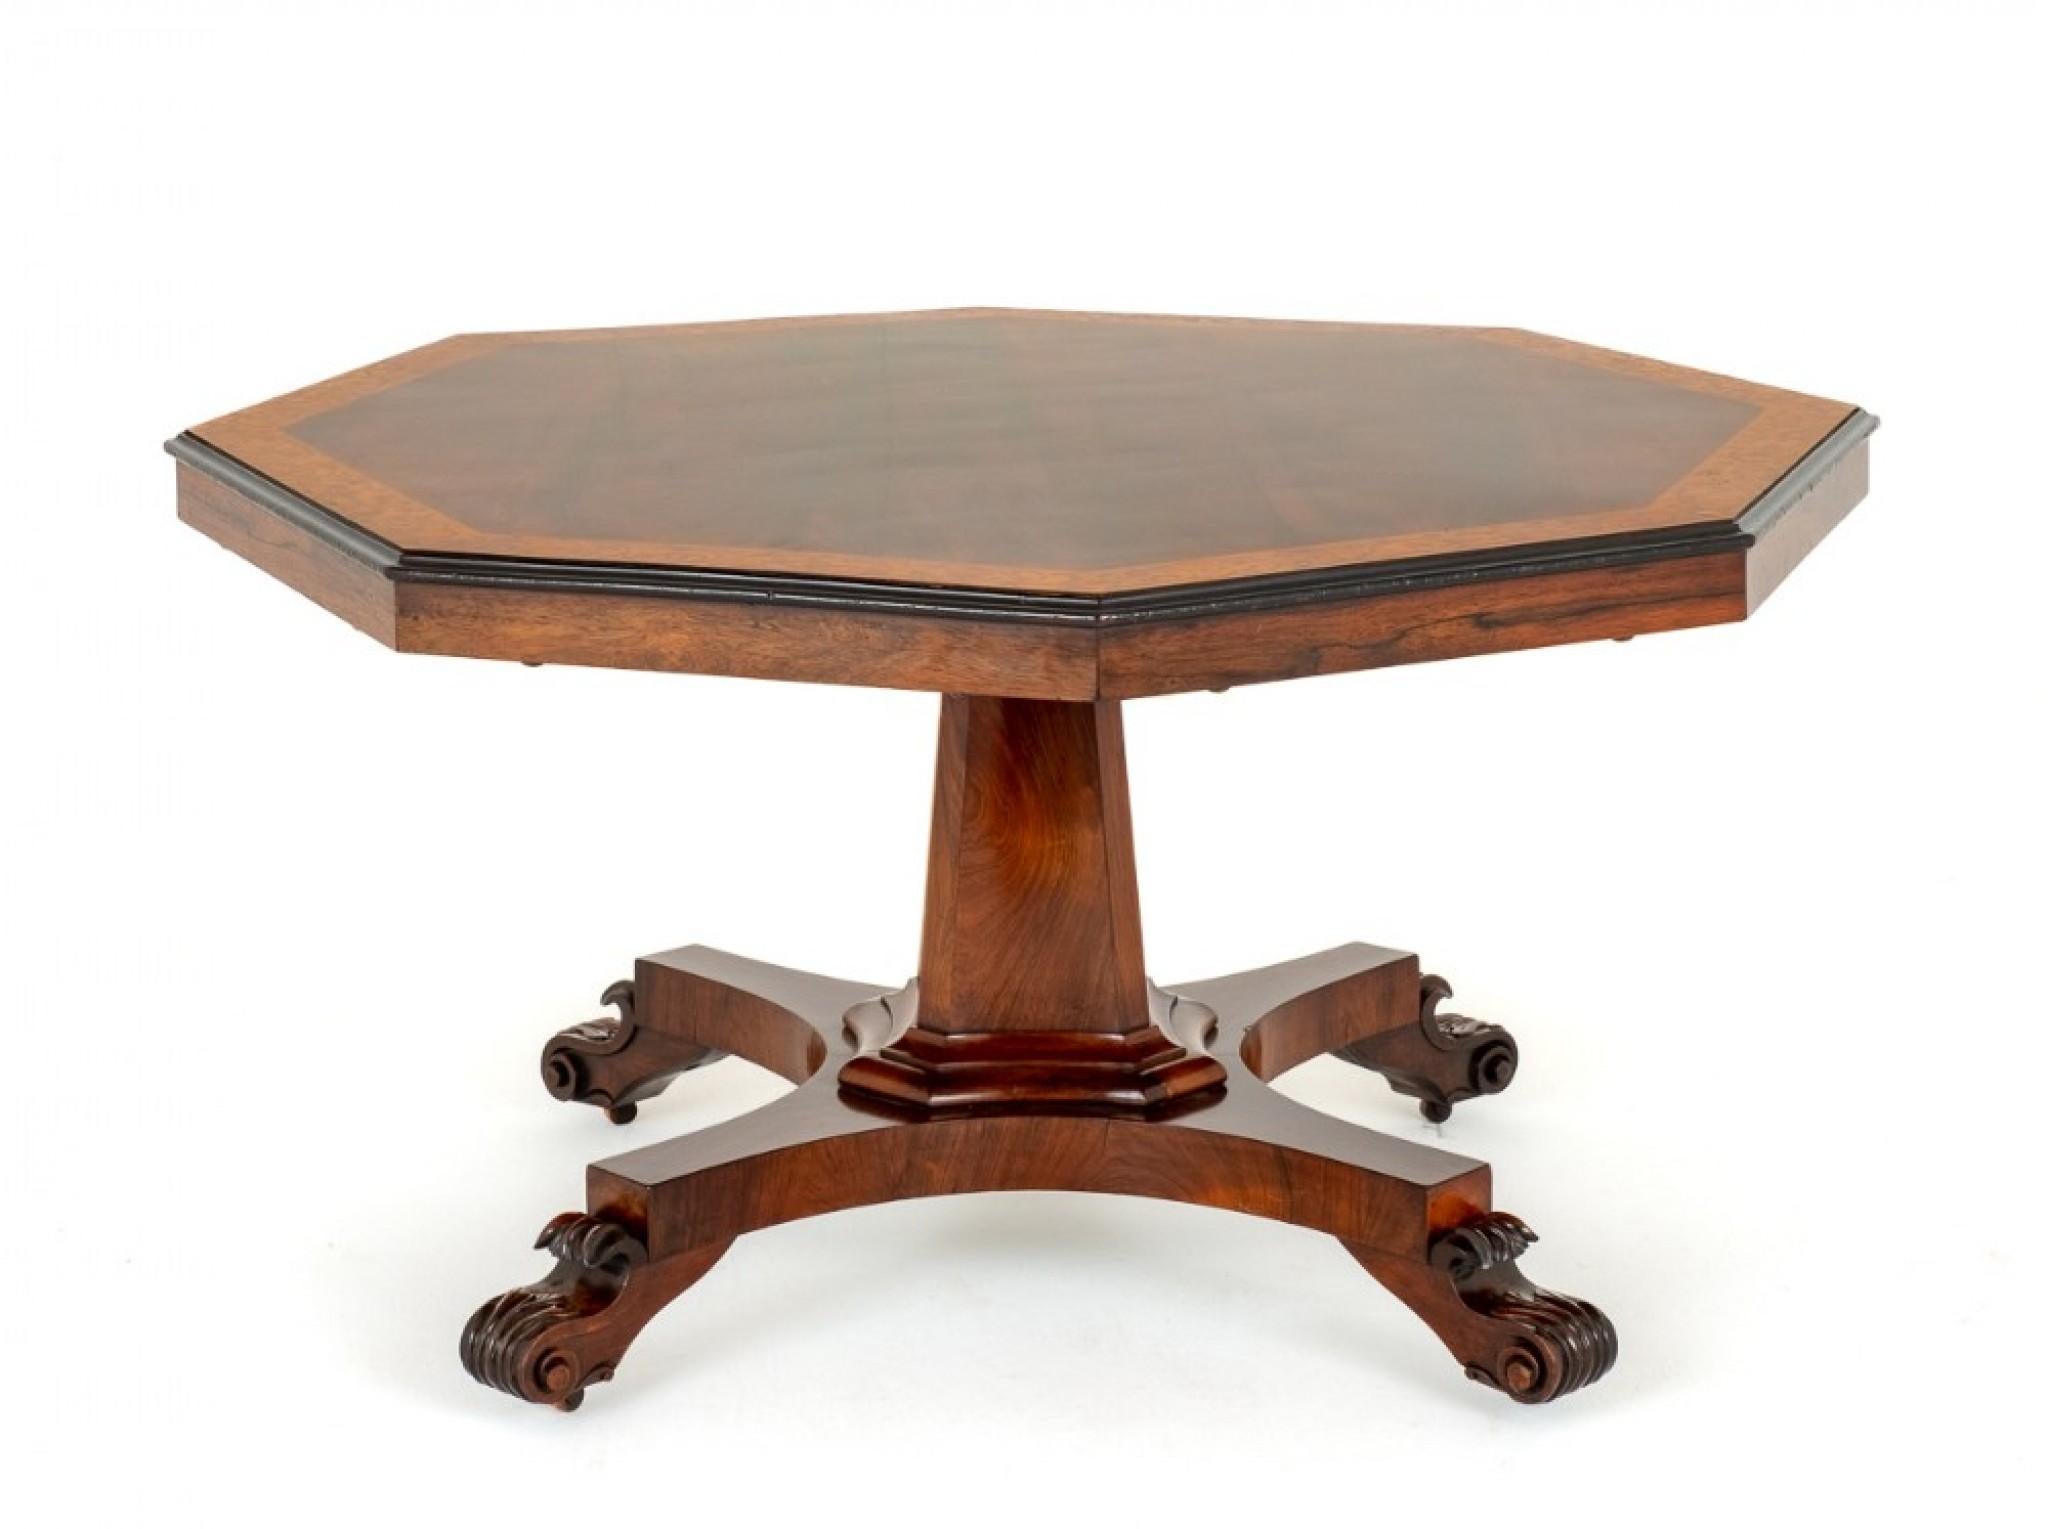 William IV Rosewood Centre Table.
Circa 19th Century
This Table Stands Upon a Quatrefoil Base with Carved Feet and a Shaped Column.
The Top of the Table Being of an Octagonal Form and Features Highly Figured Rosewood Timbers With a Satinwood Border